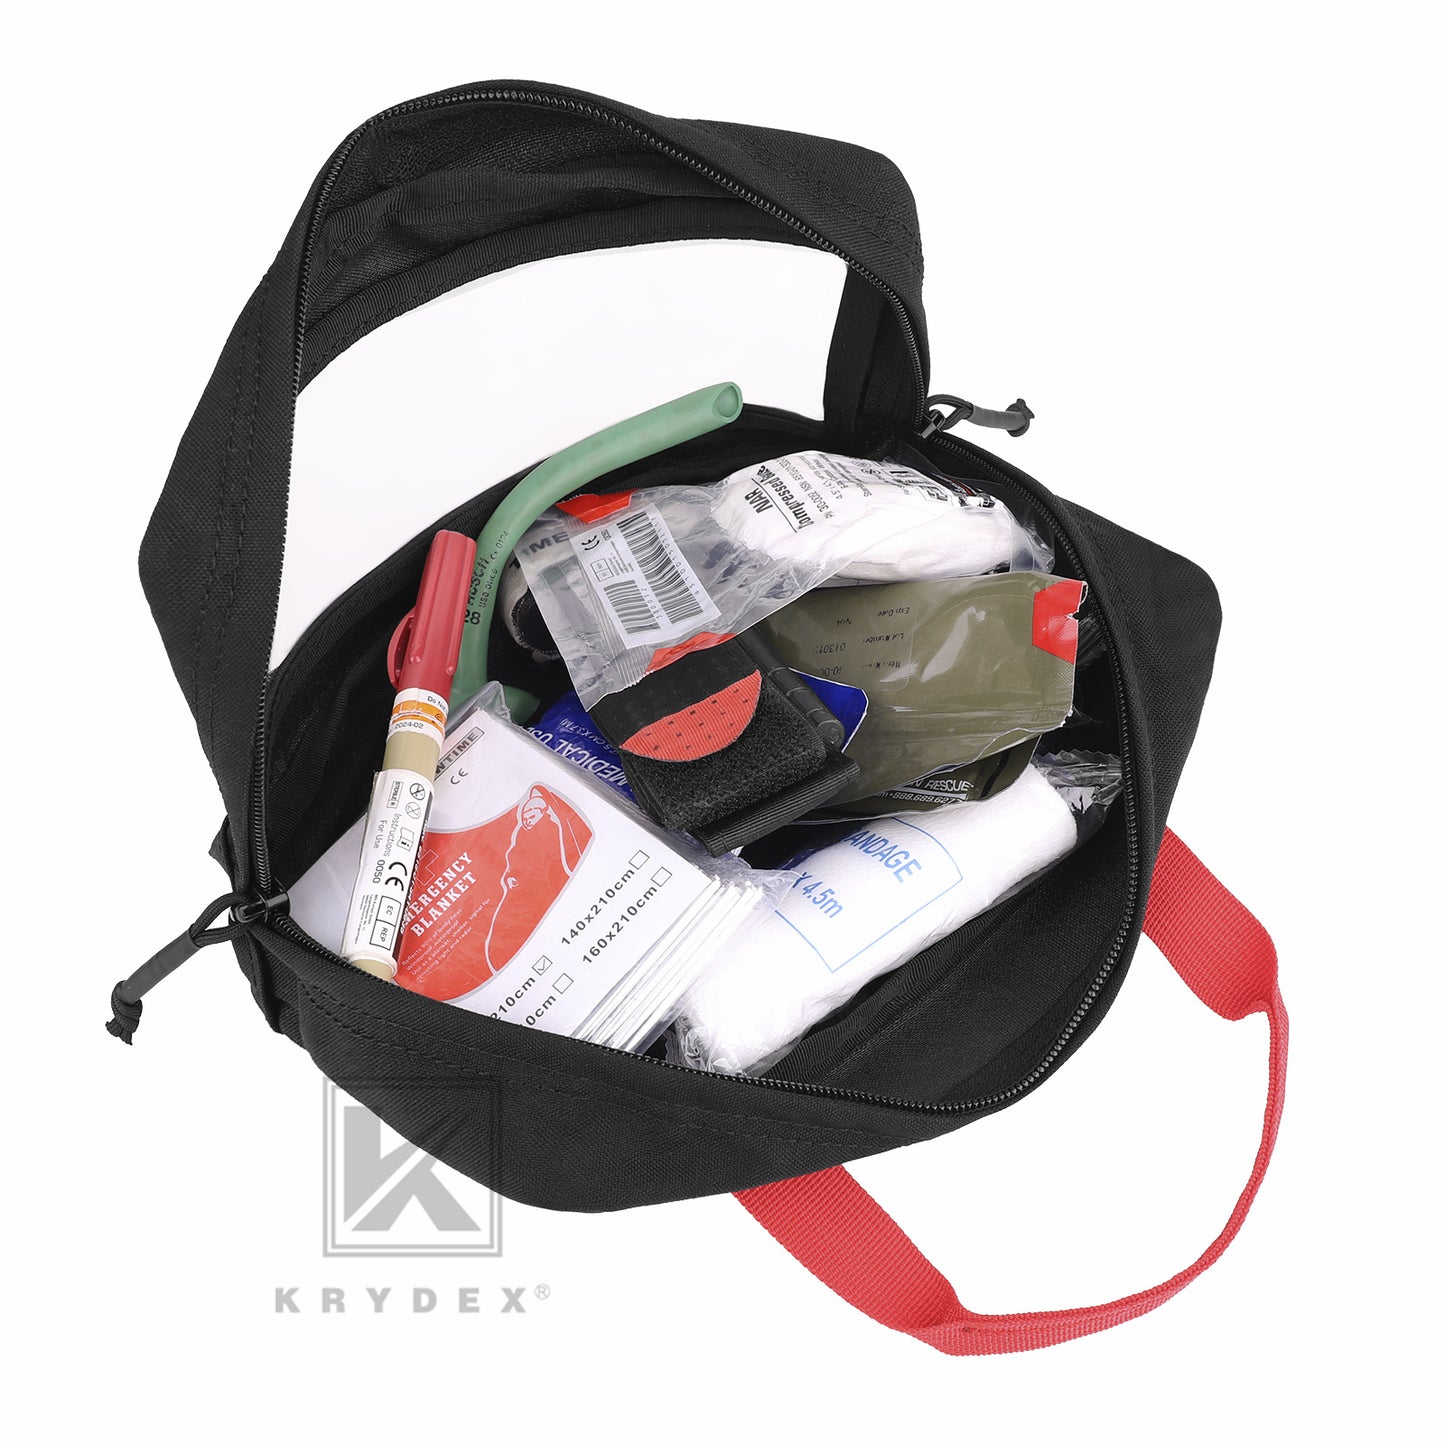 Krydex Clear Top Insert Large/Small for D3 Tactical Backpack Organizer Bag Hook & Loop Medic Pouch